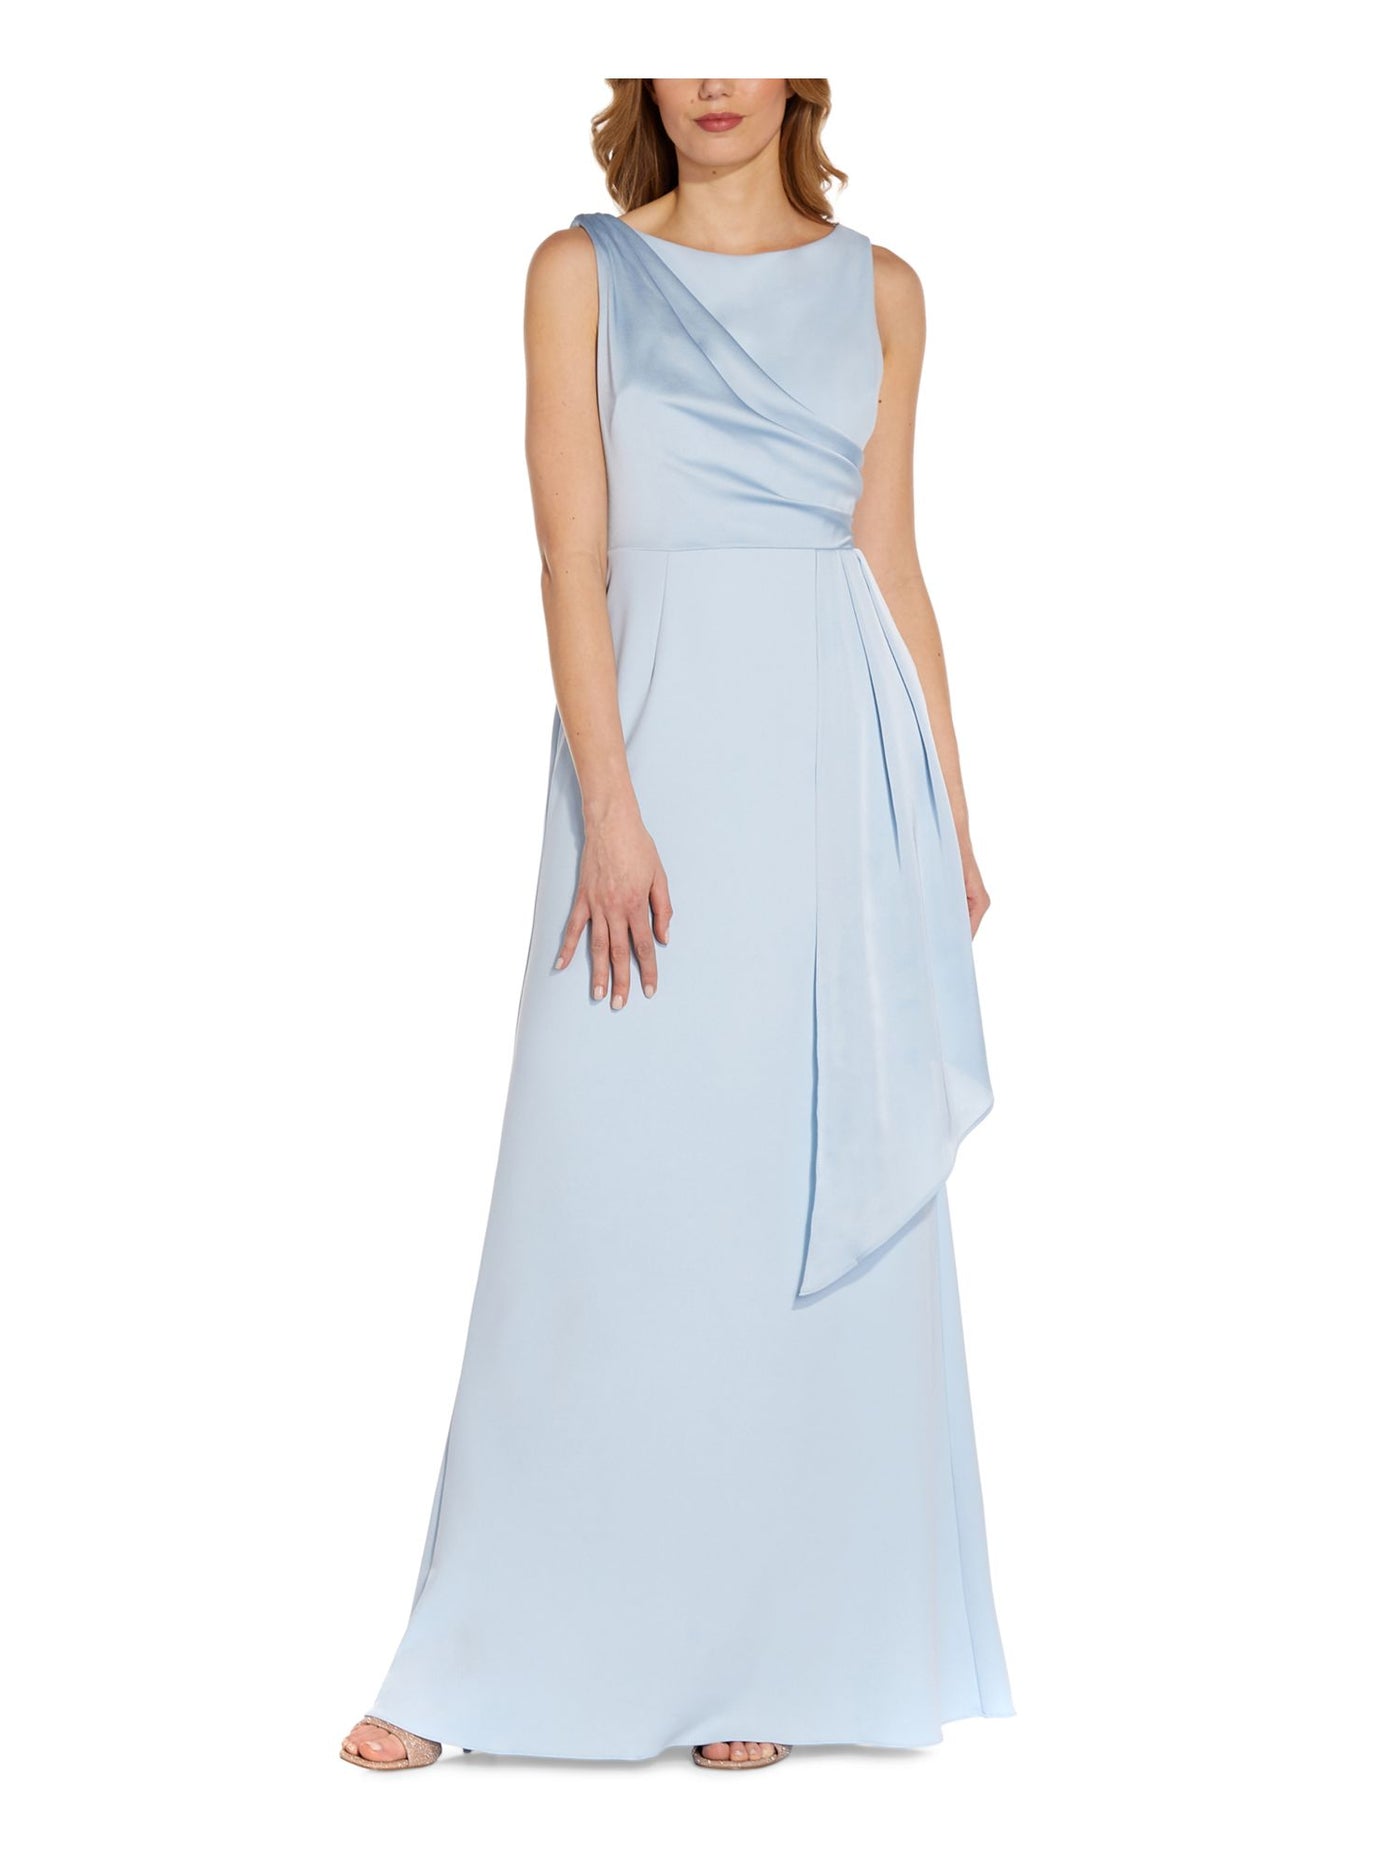 ADRIANNA PAPELL Womens Stretch Zippered Pleated Satin Draped V-back Sleeveless Boat Neck Full-Length Formal Gown Dress